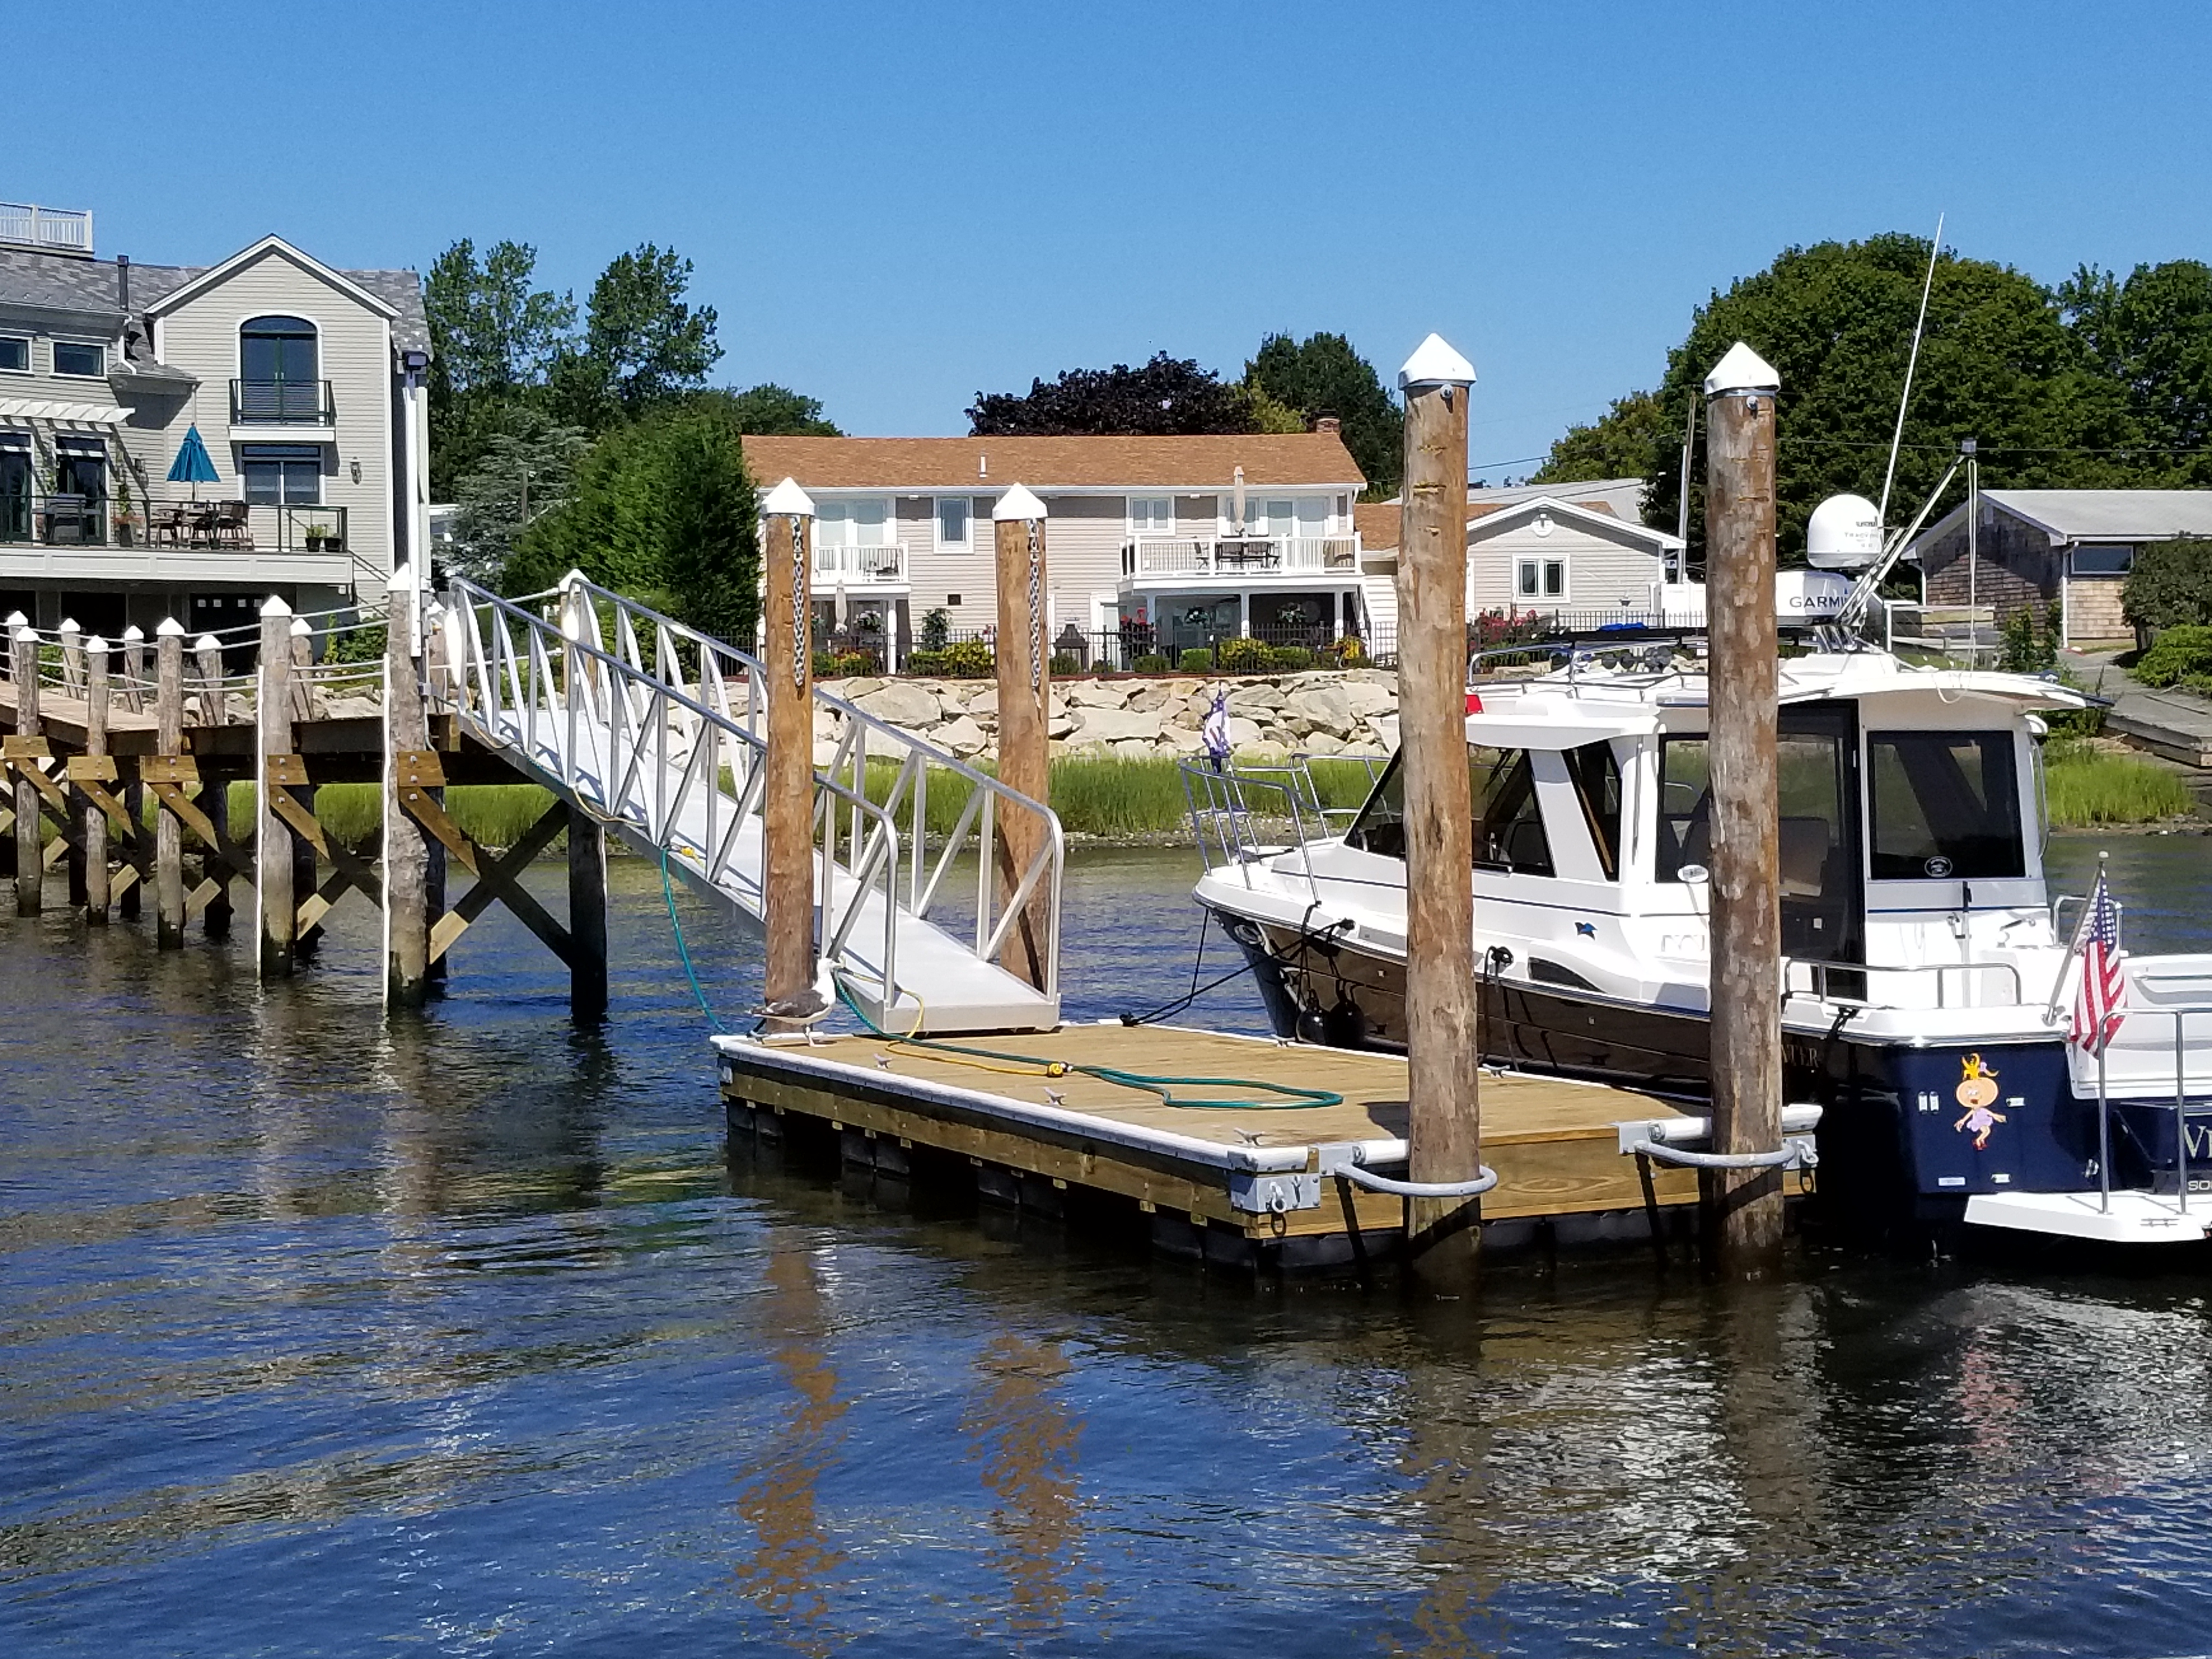 New residential dock - Somerset MA